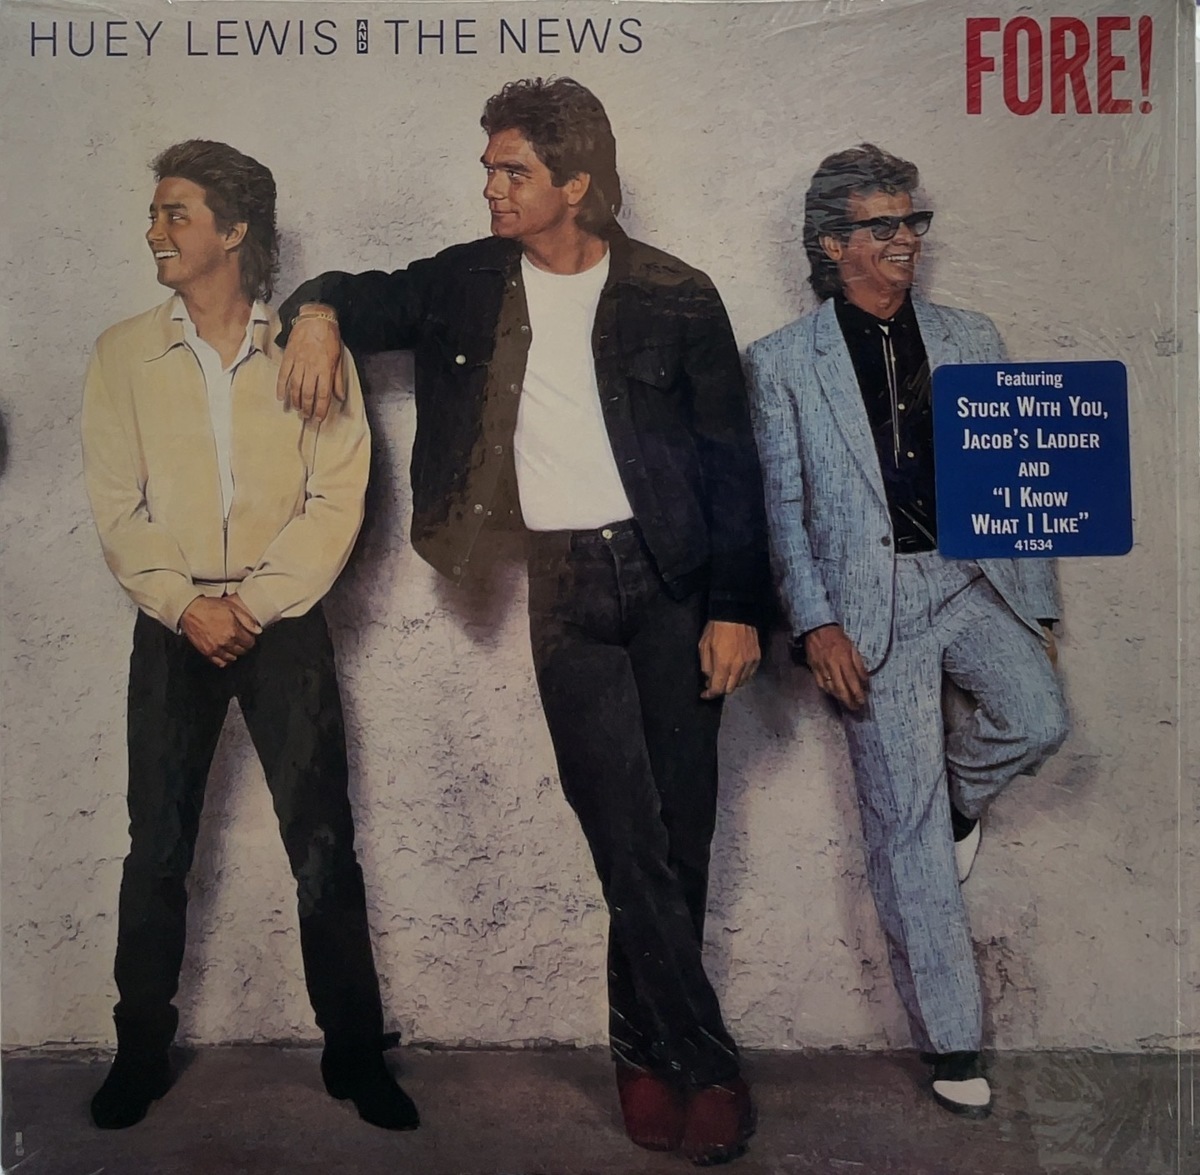 HUEY LEWIS AND THE NEWS / FORE! (OV 41534)_画像1